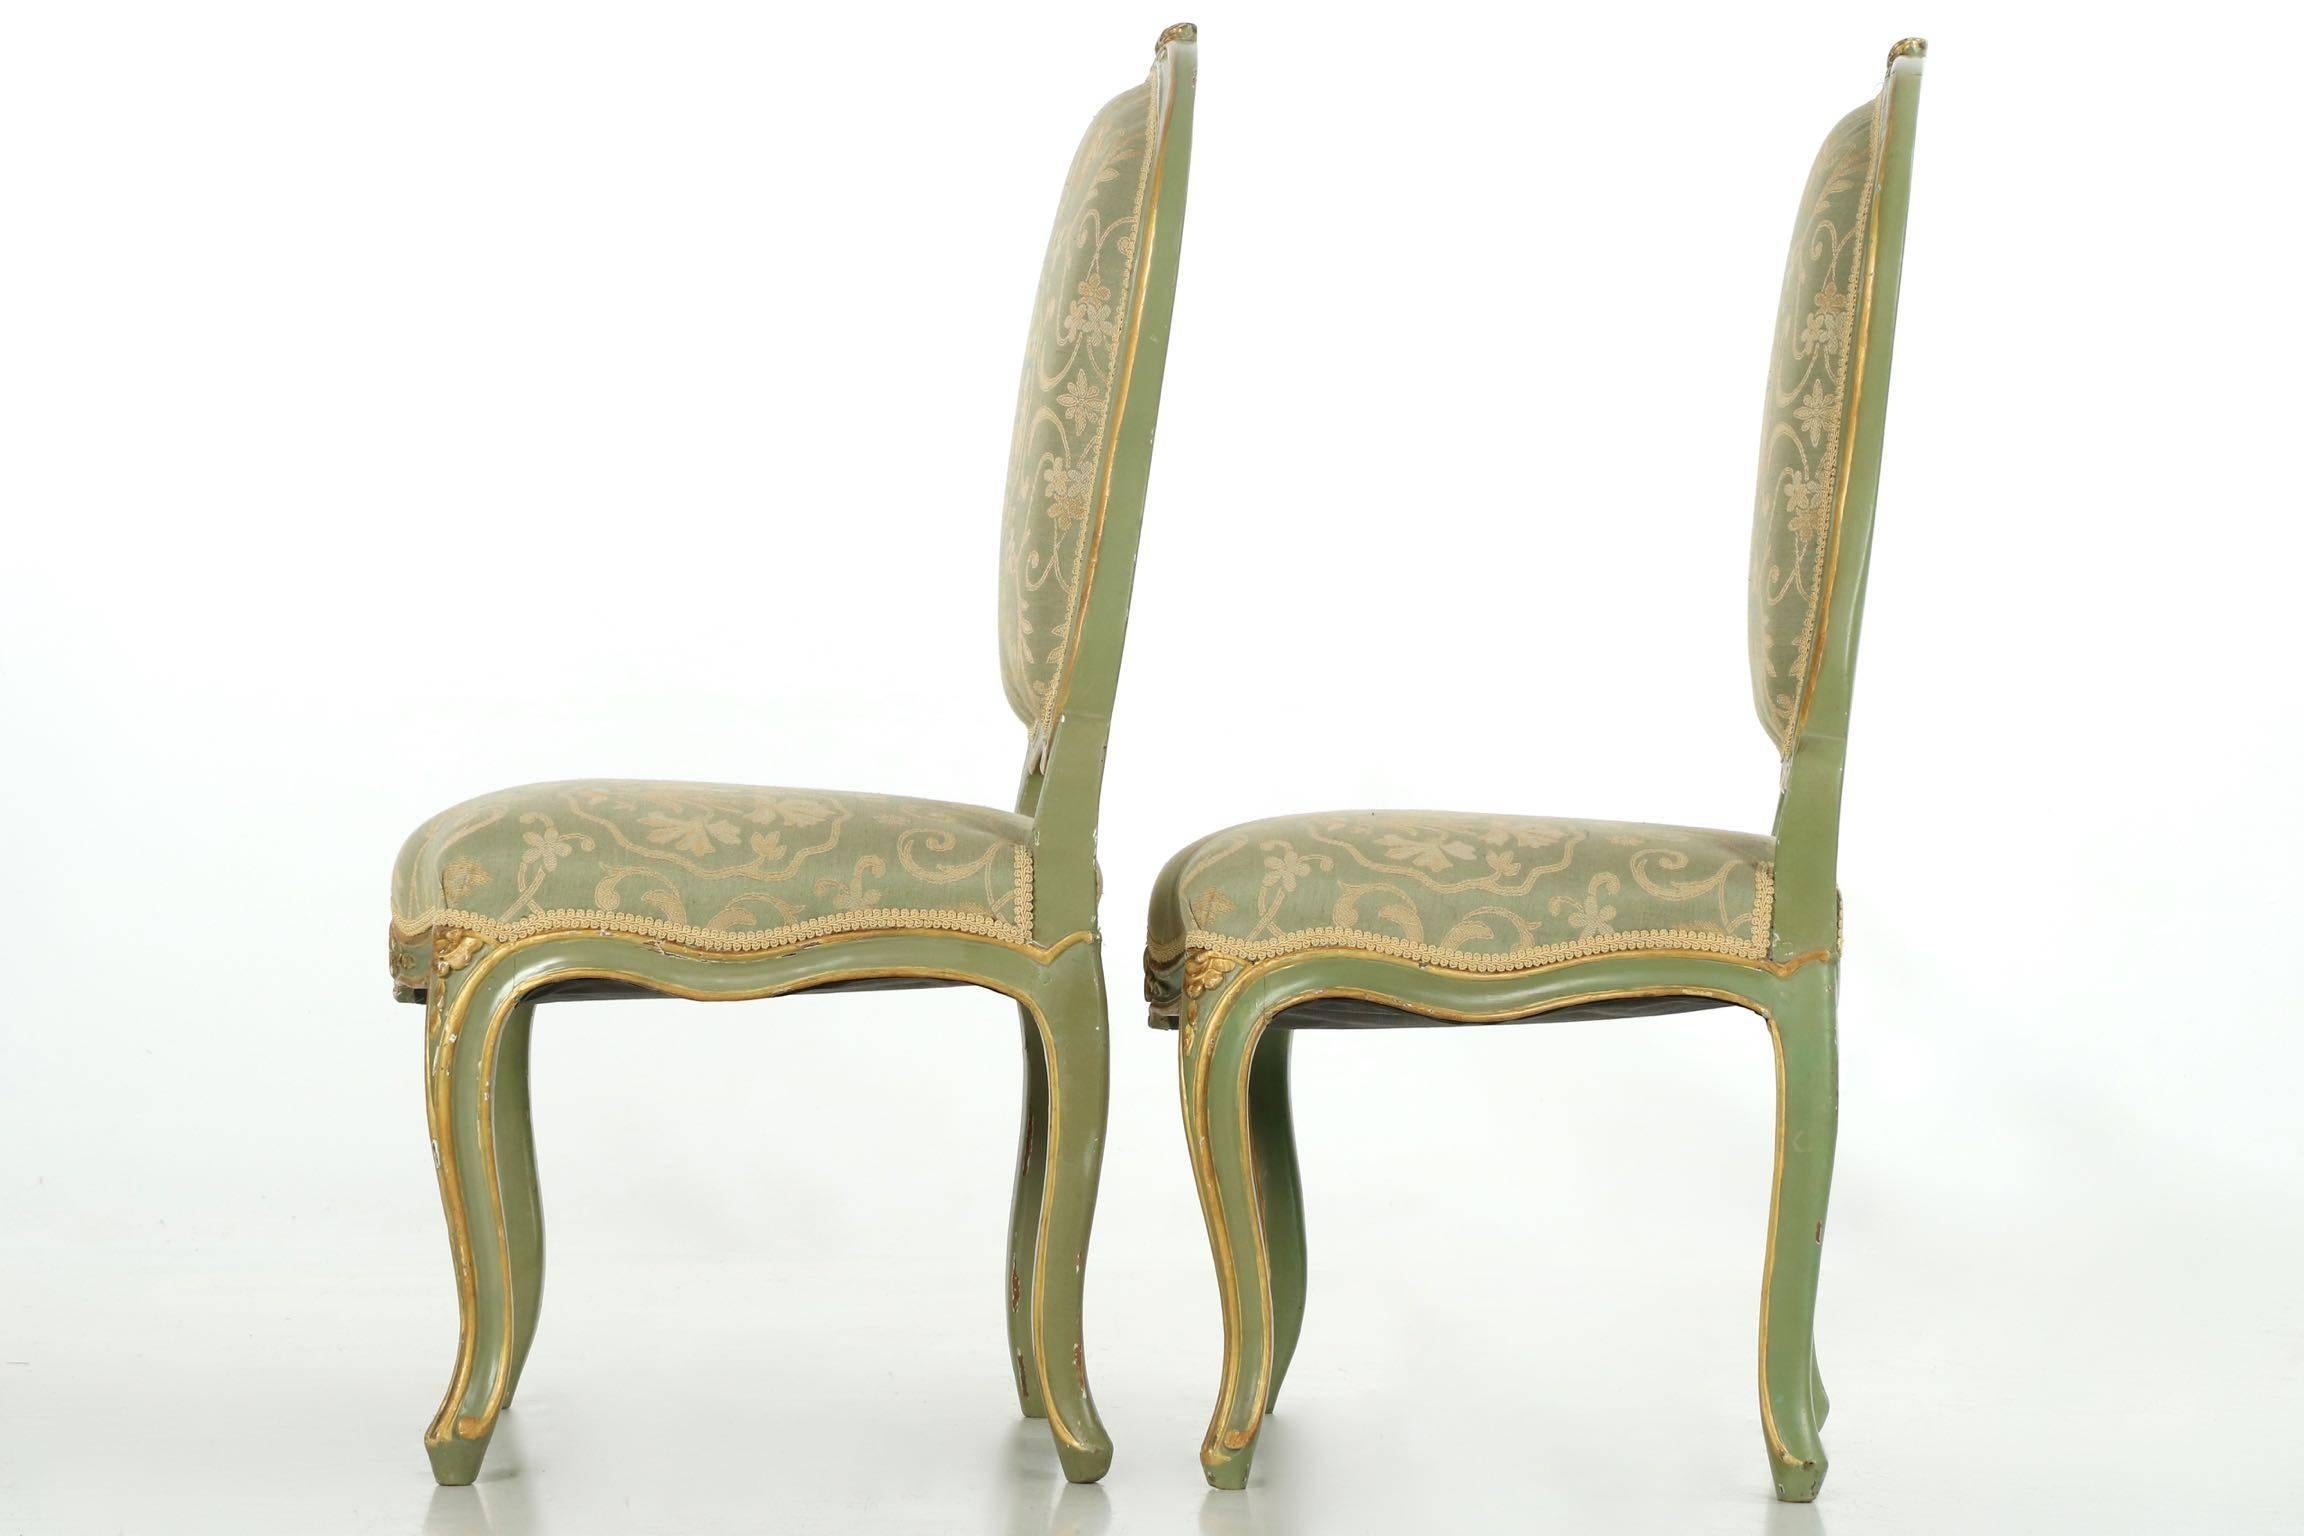 An excellent pair of mid-late 19th century side chairs in the Louis XV taste, they are crafted with precision using tenon-mortise joints locked together with pins that are just barely visible under the surface with hairline cracking where the pin